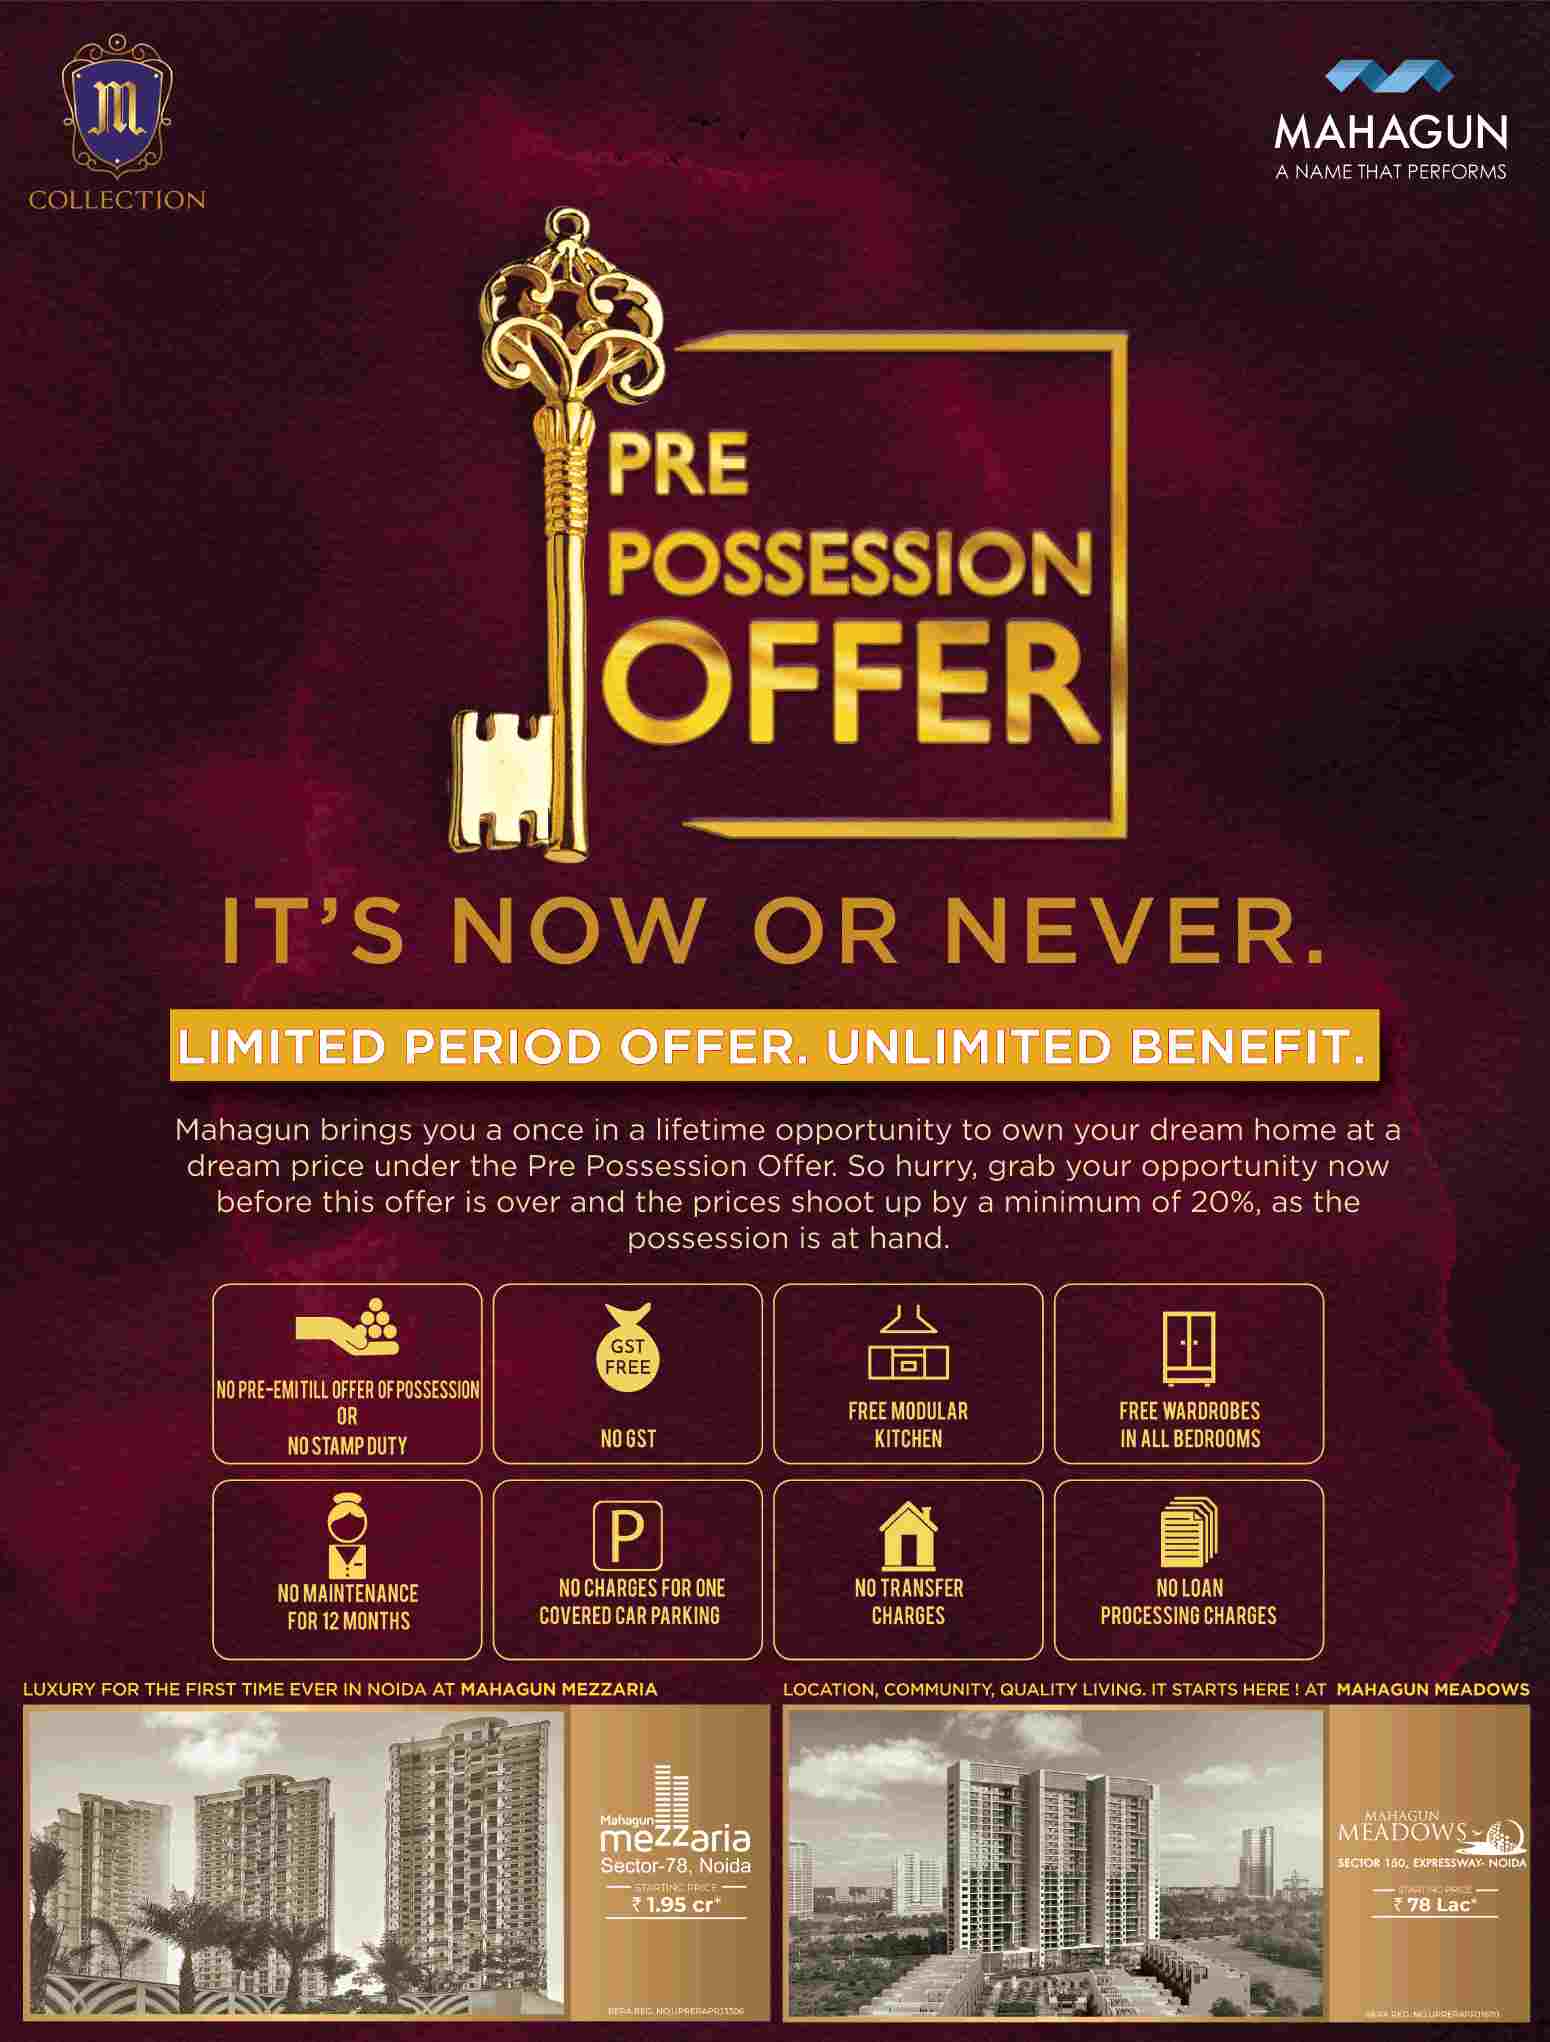 Avail the Pre Possession Offer at Mahagun Properties in Noida Update